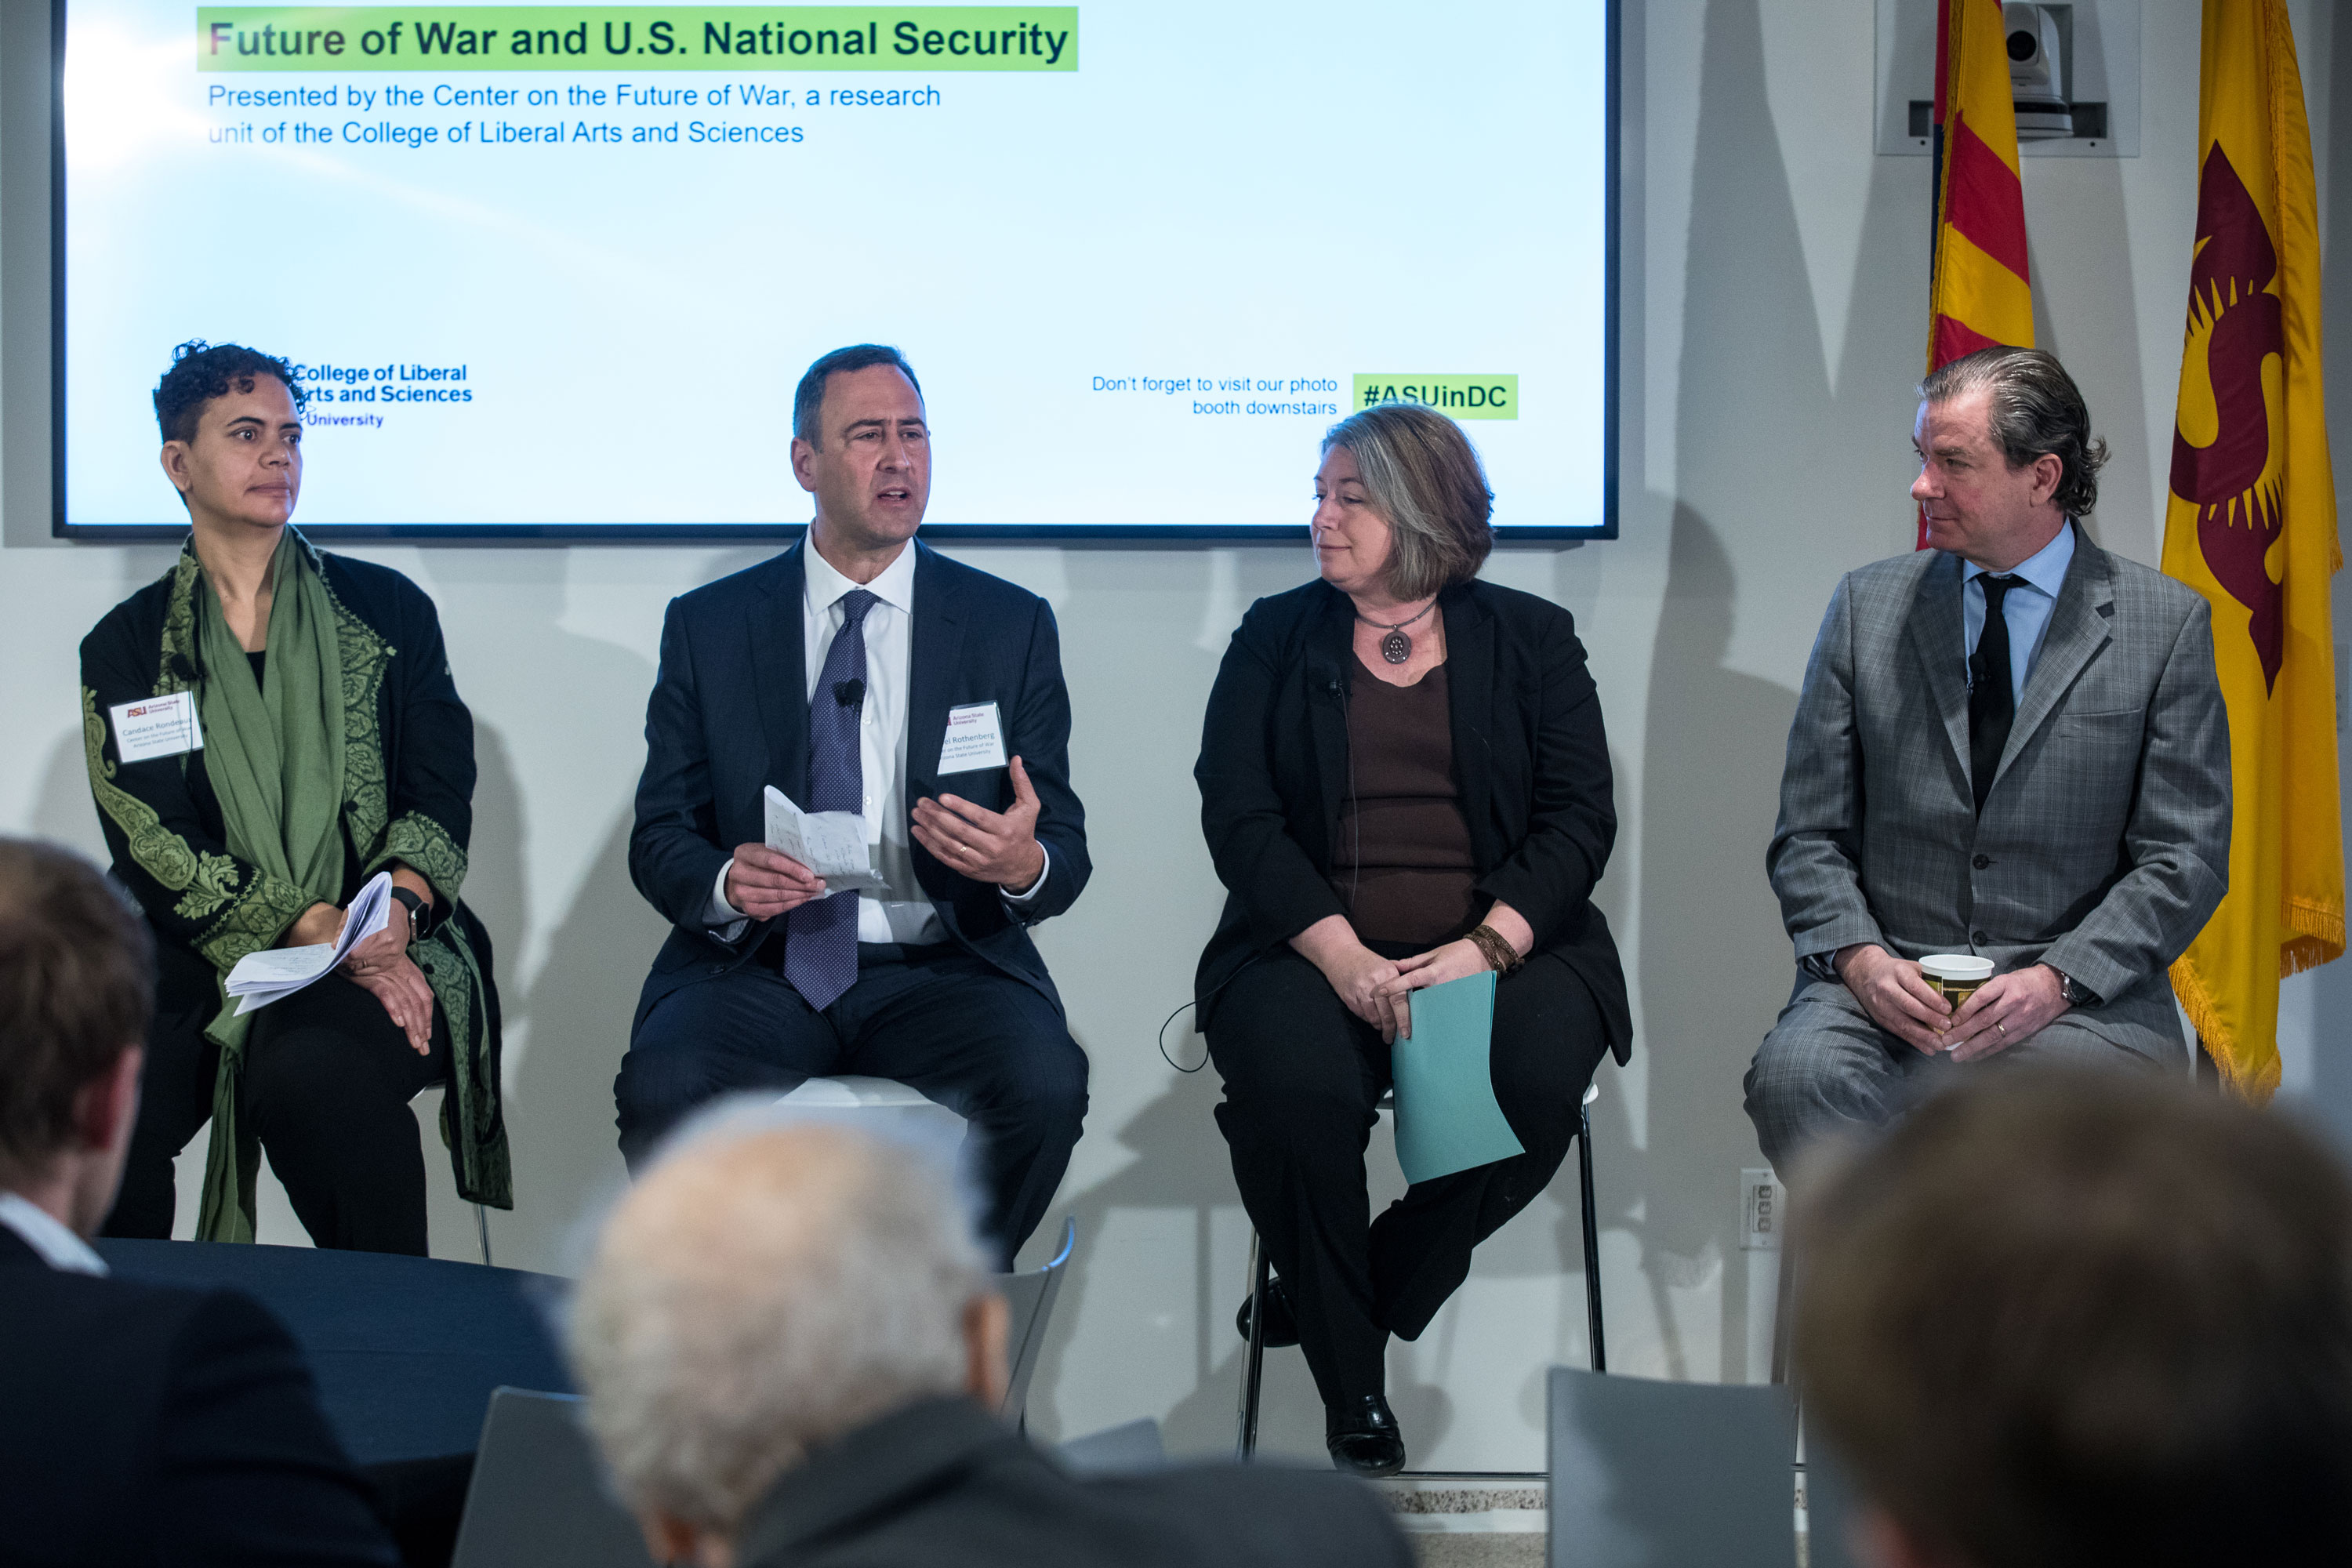 Presentation of future of war and national security